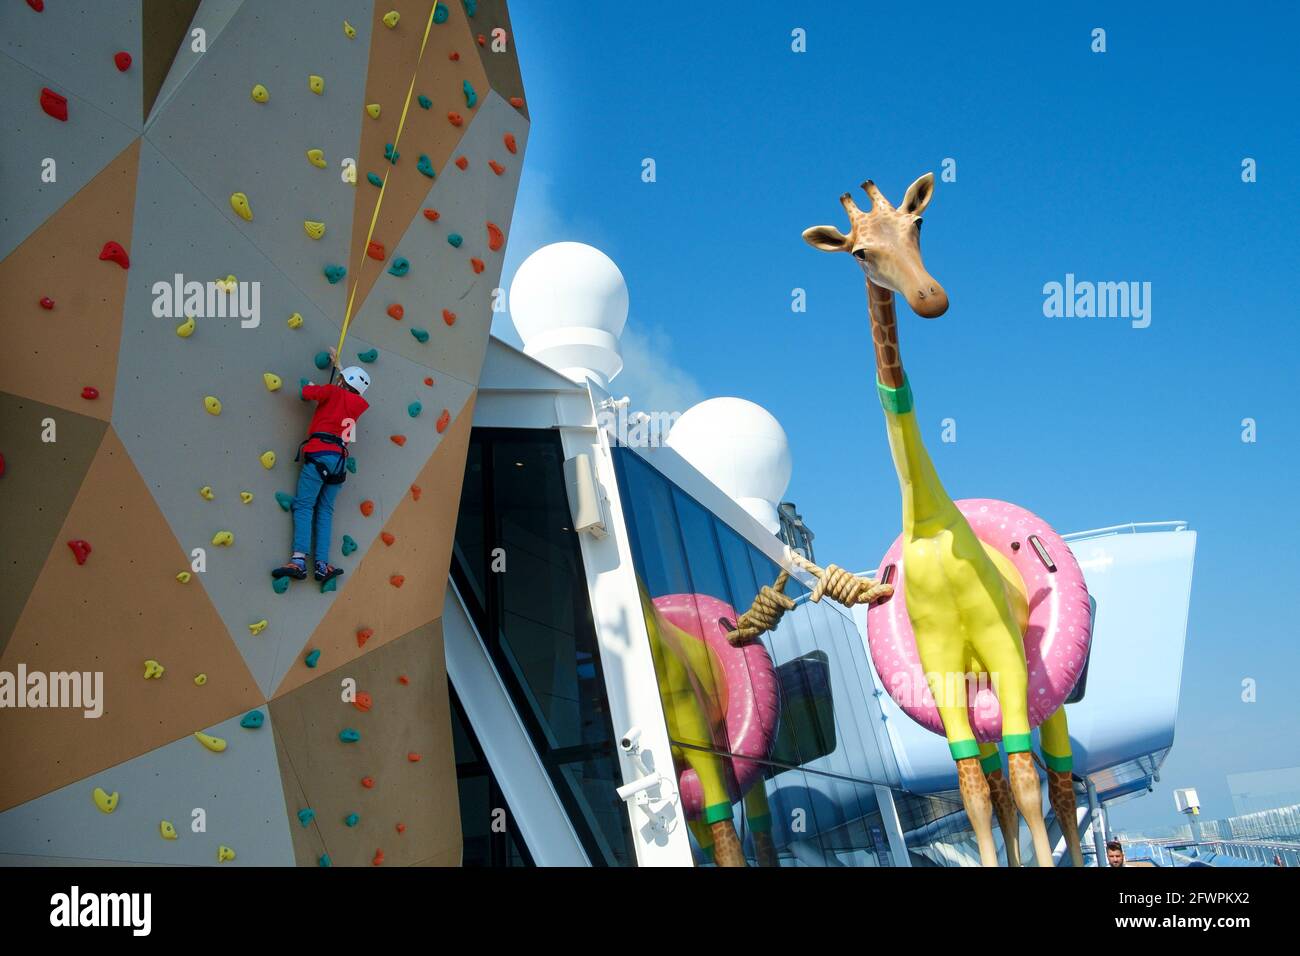 A young boy on the climbing wall next to a giant Giraffe called Gigi by french artist Jean Francois aboard Royal Caribbean ship Anthem of the Seas. Stock Photo